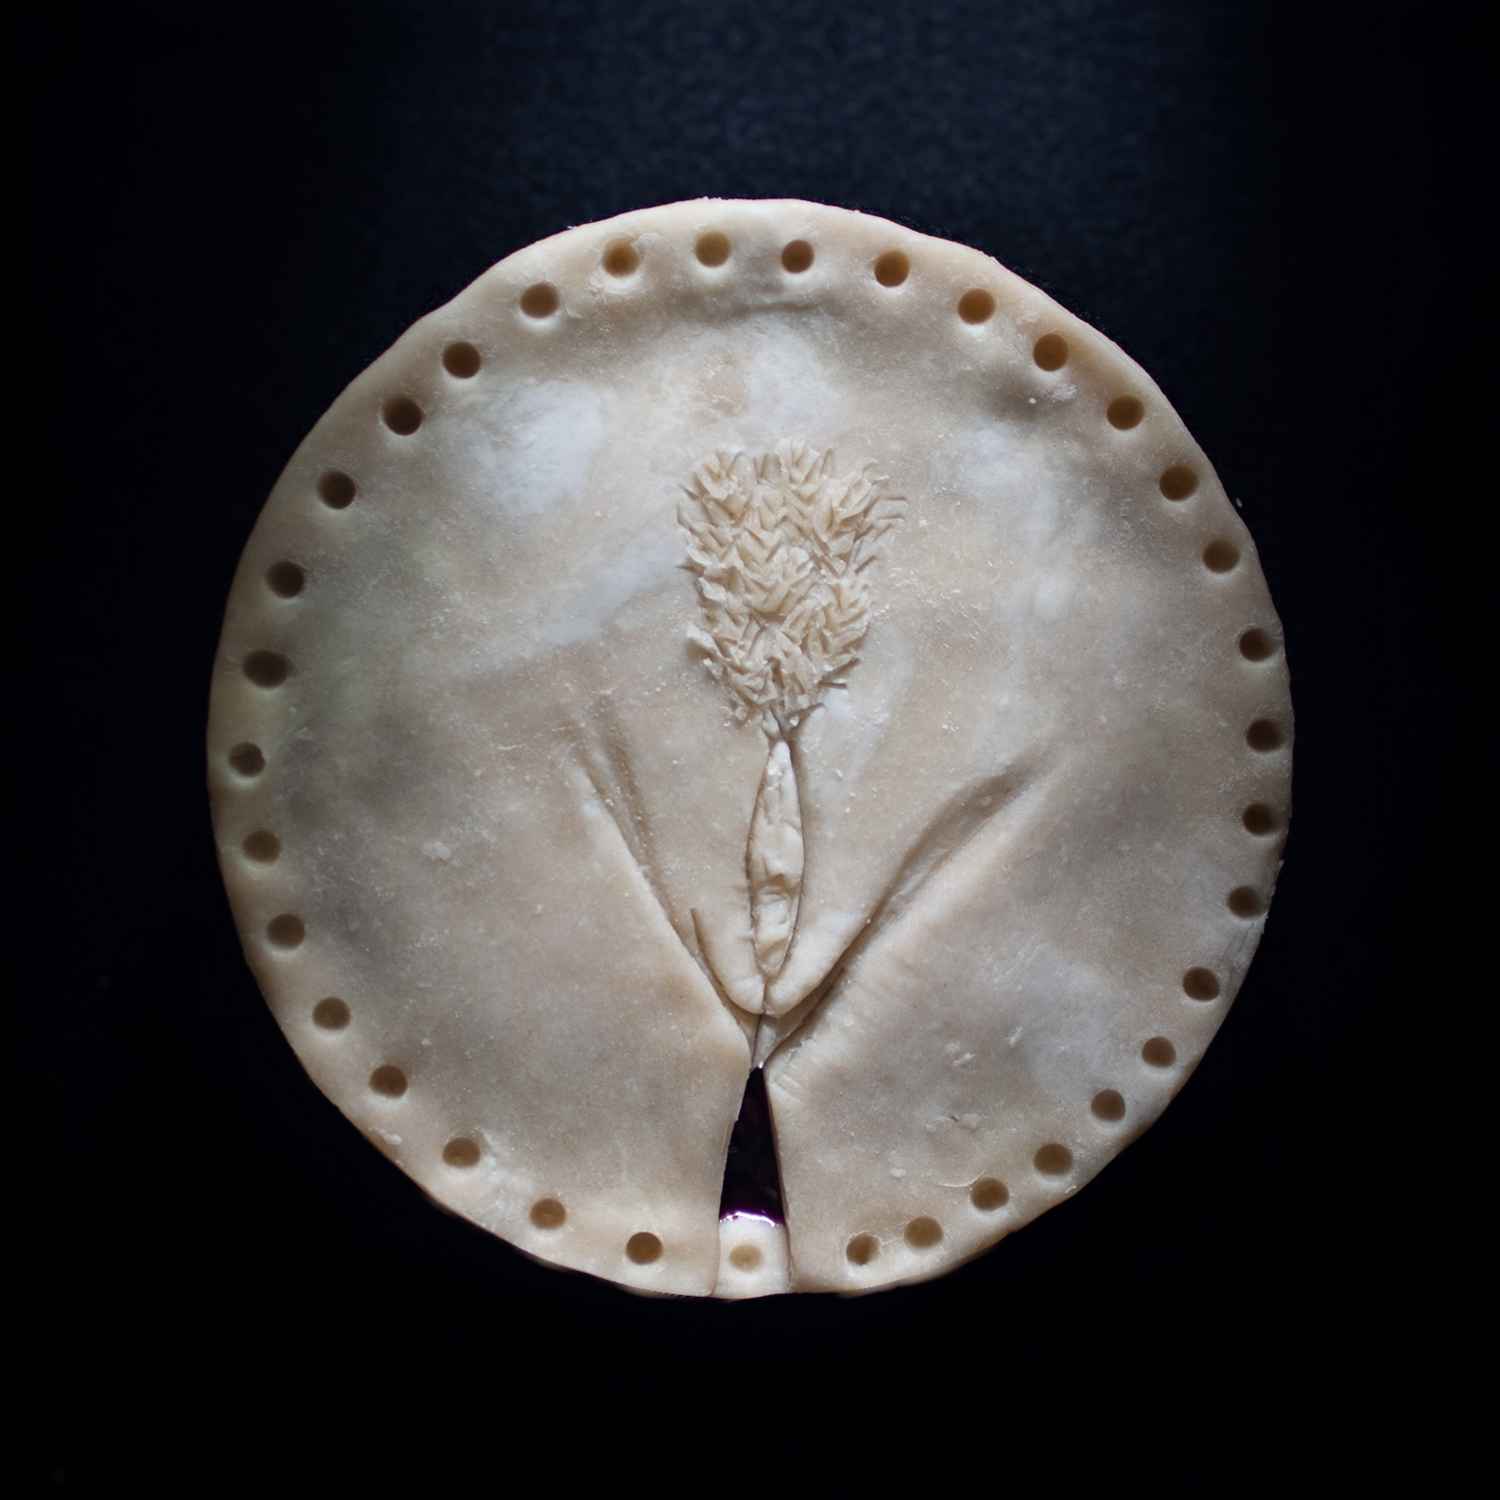 Pie 23, a pie sculpted to appear like a vulva